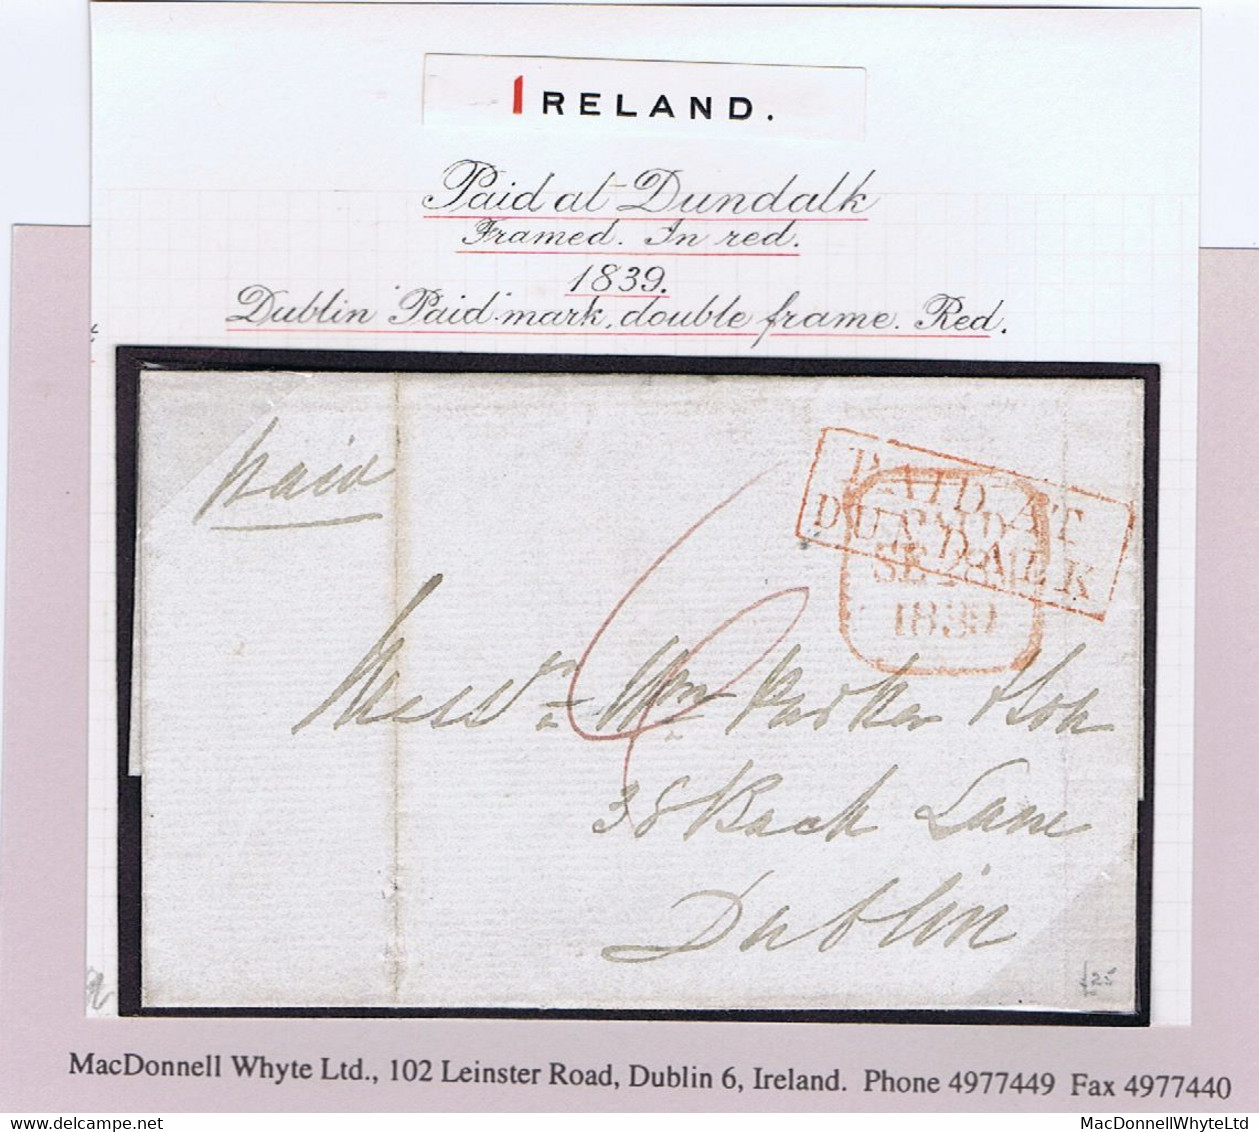 Ireland Louth 1839 Boxed 2-line PAID AT DUNDALK In Red On Cover To Dublin Prepaid Single "6" Sixpence 35 To 45 Miles - Prefilatelia